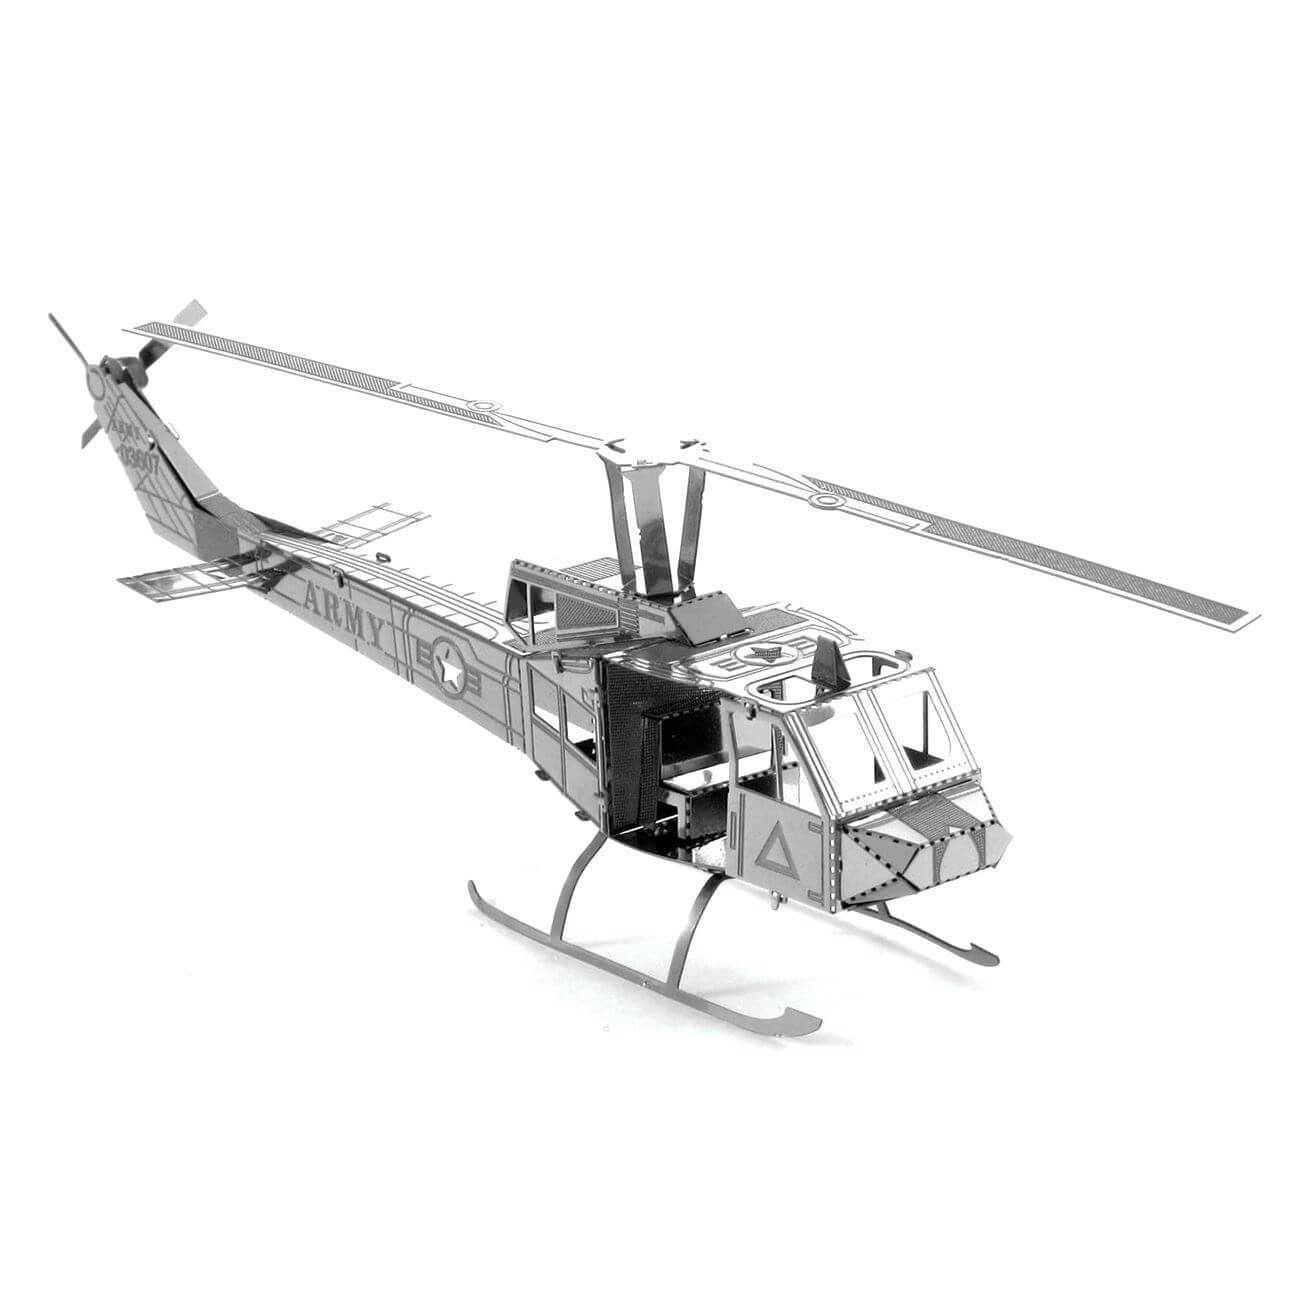 Side view of the helicopter.